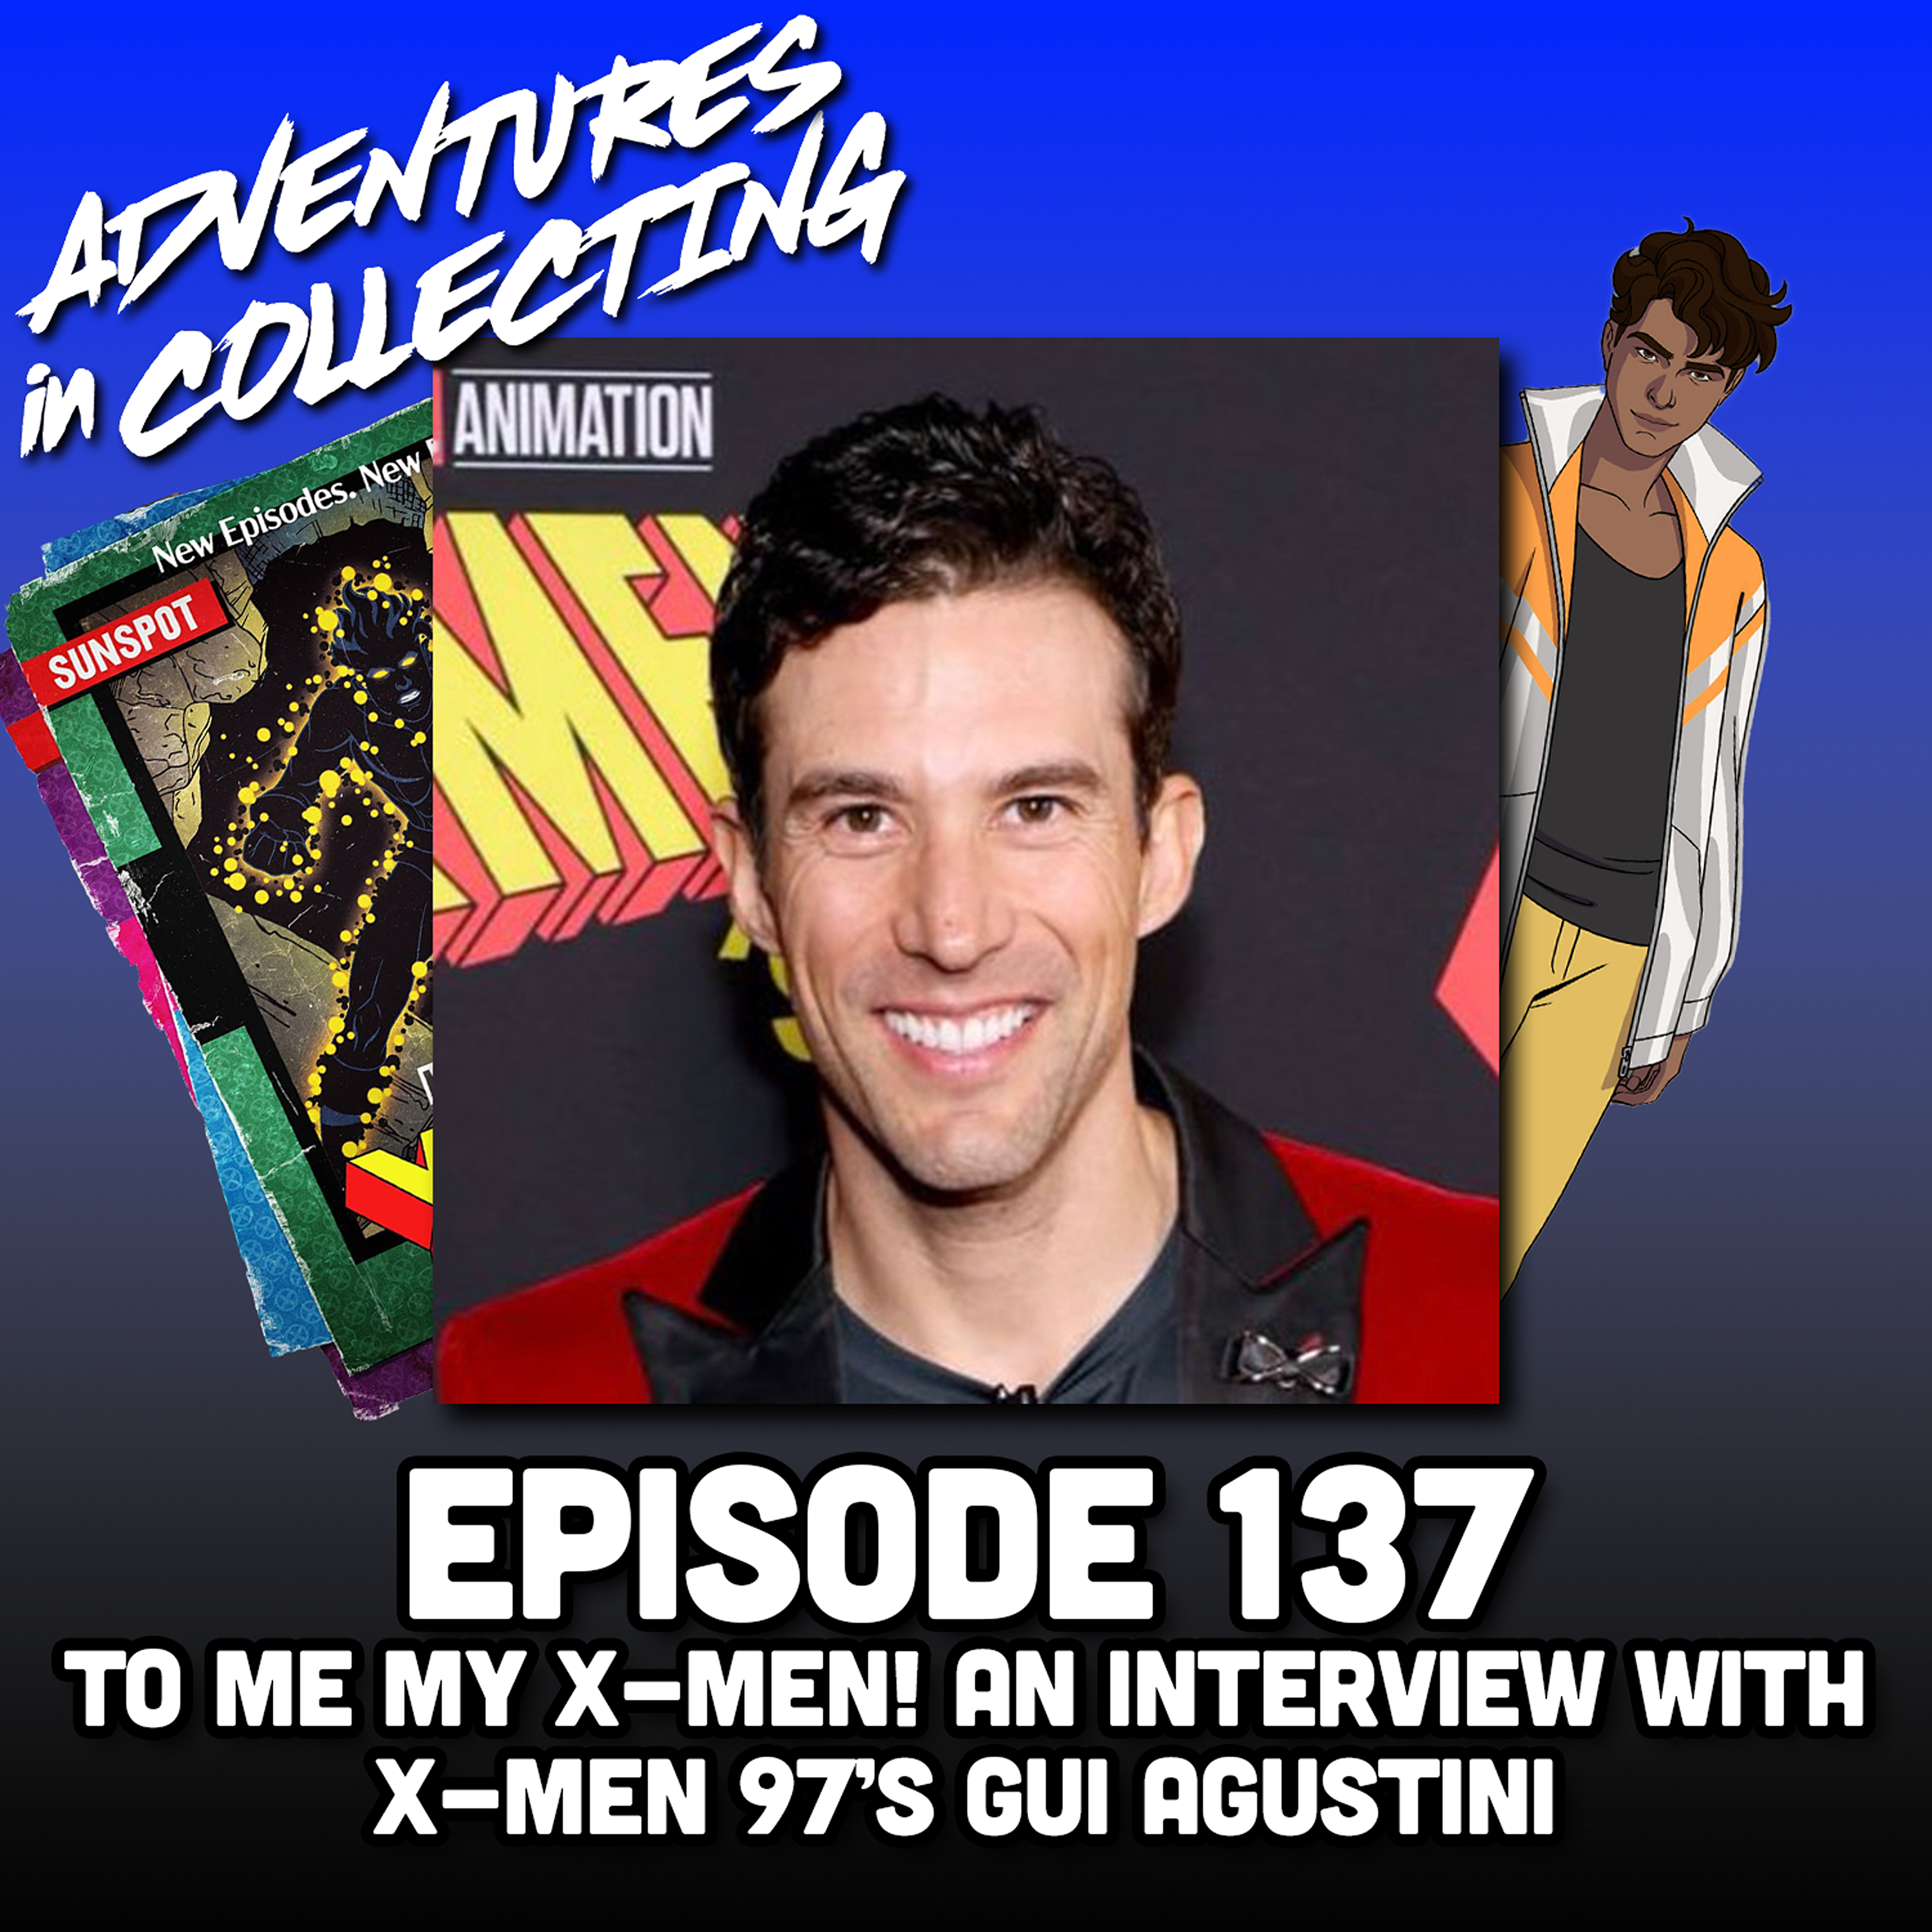 To Me My X-Men! An Interview with X-Men 97's Gui Agustini